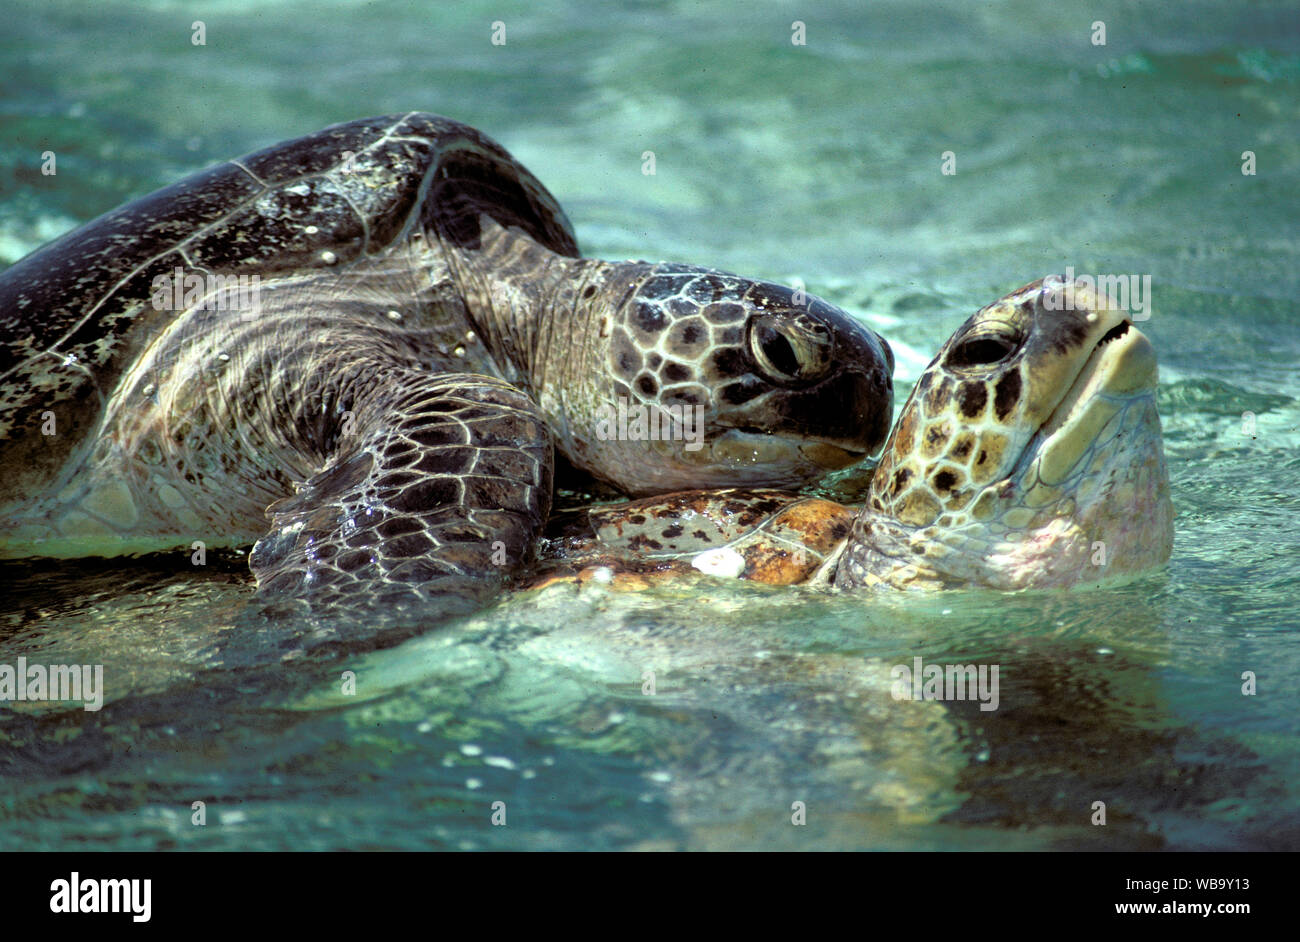 Green turtles (Chelonia mydas), mating. Lady Musgrave Island, Capricornia Cays National Park, Capricorn-Bunker Group, Great Barrier Reef, Queensland, Stock Photo